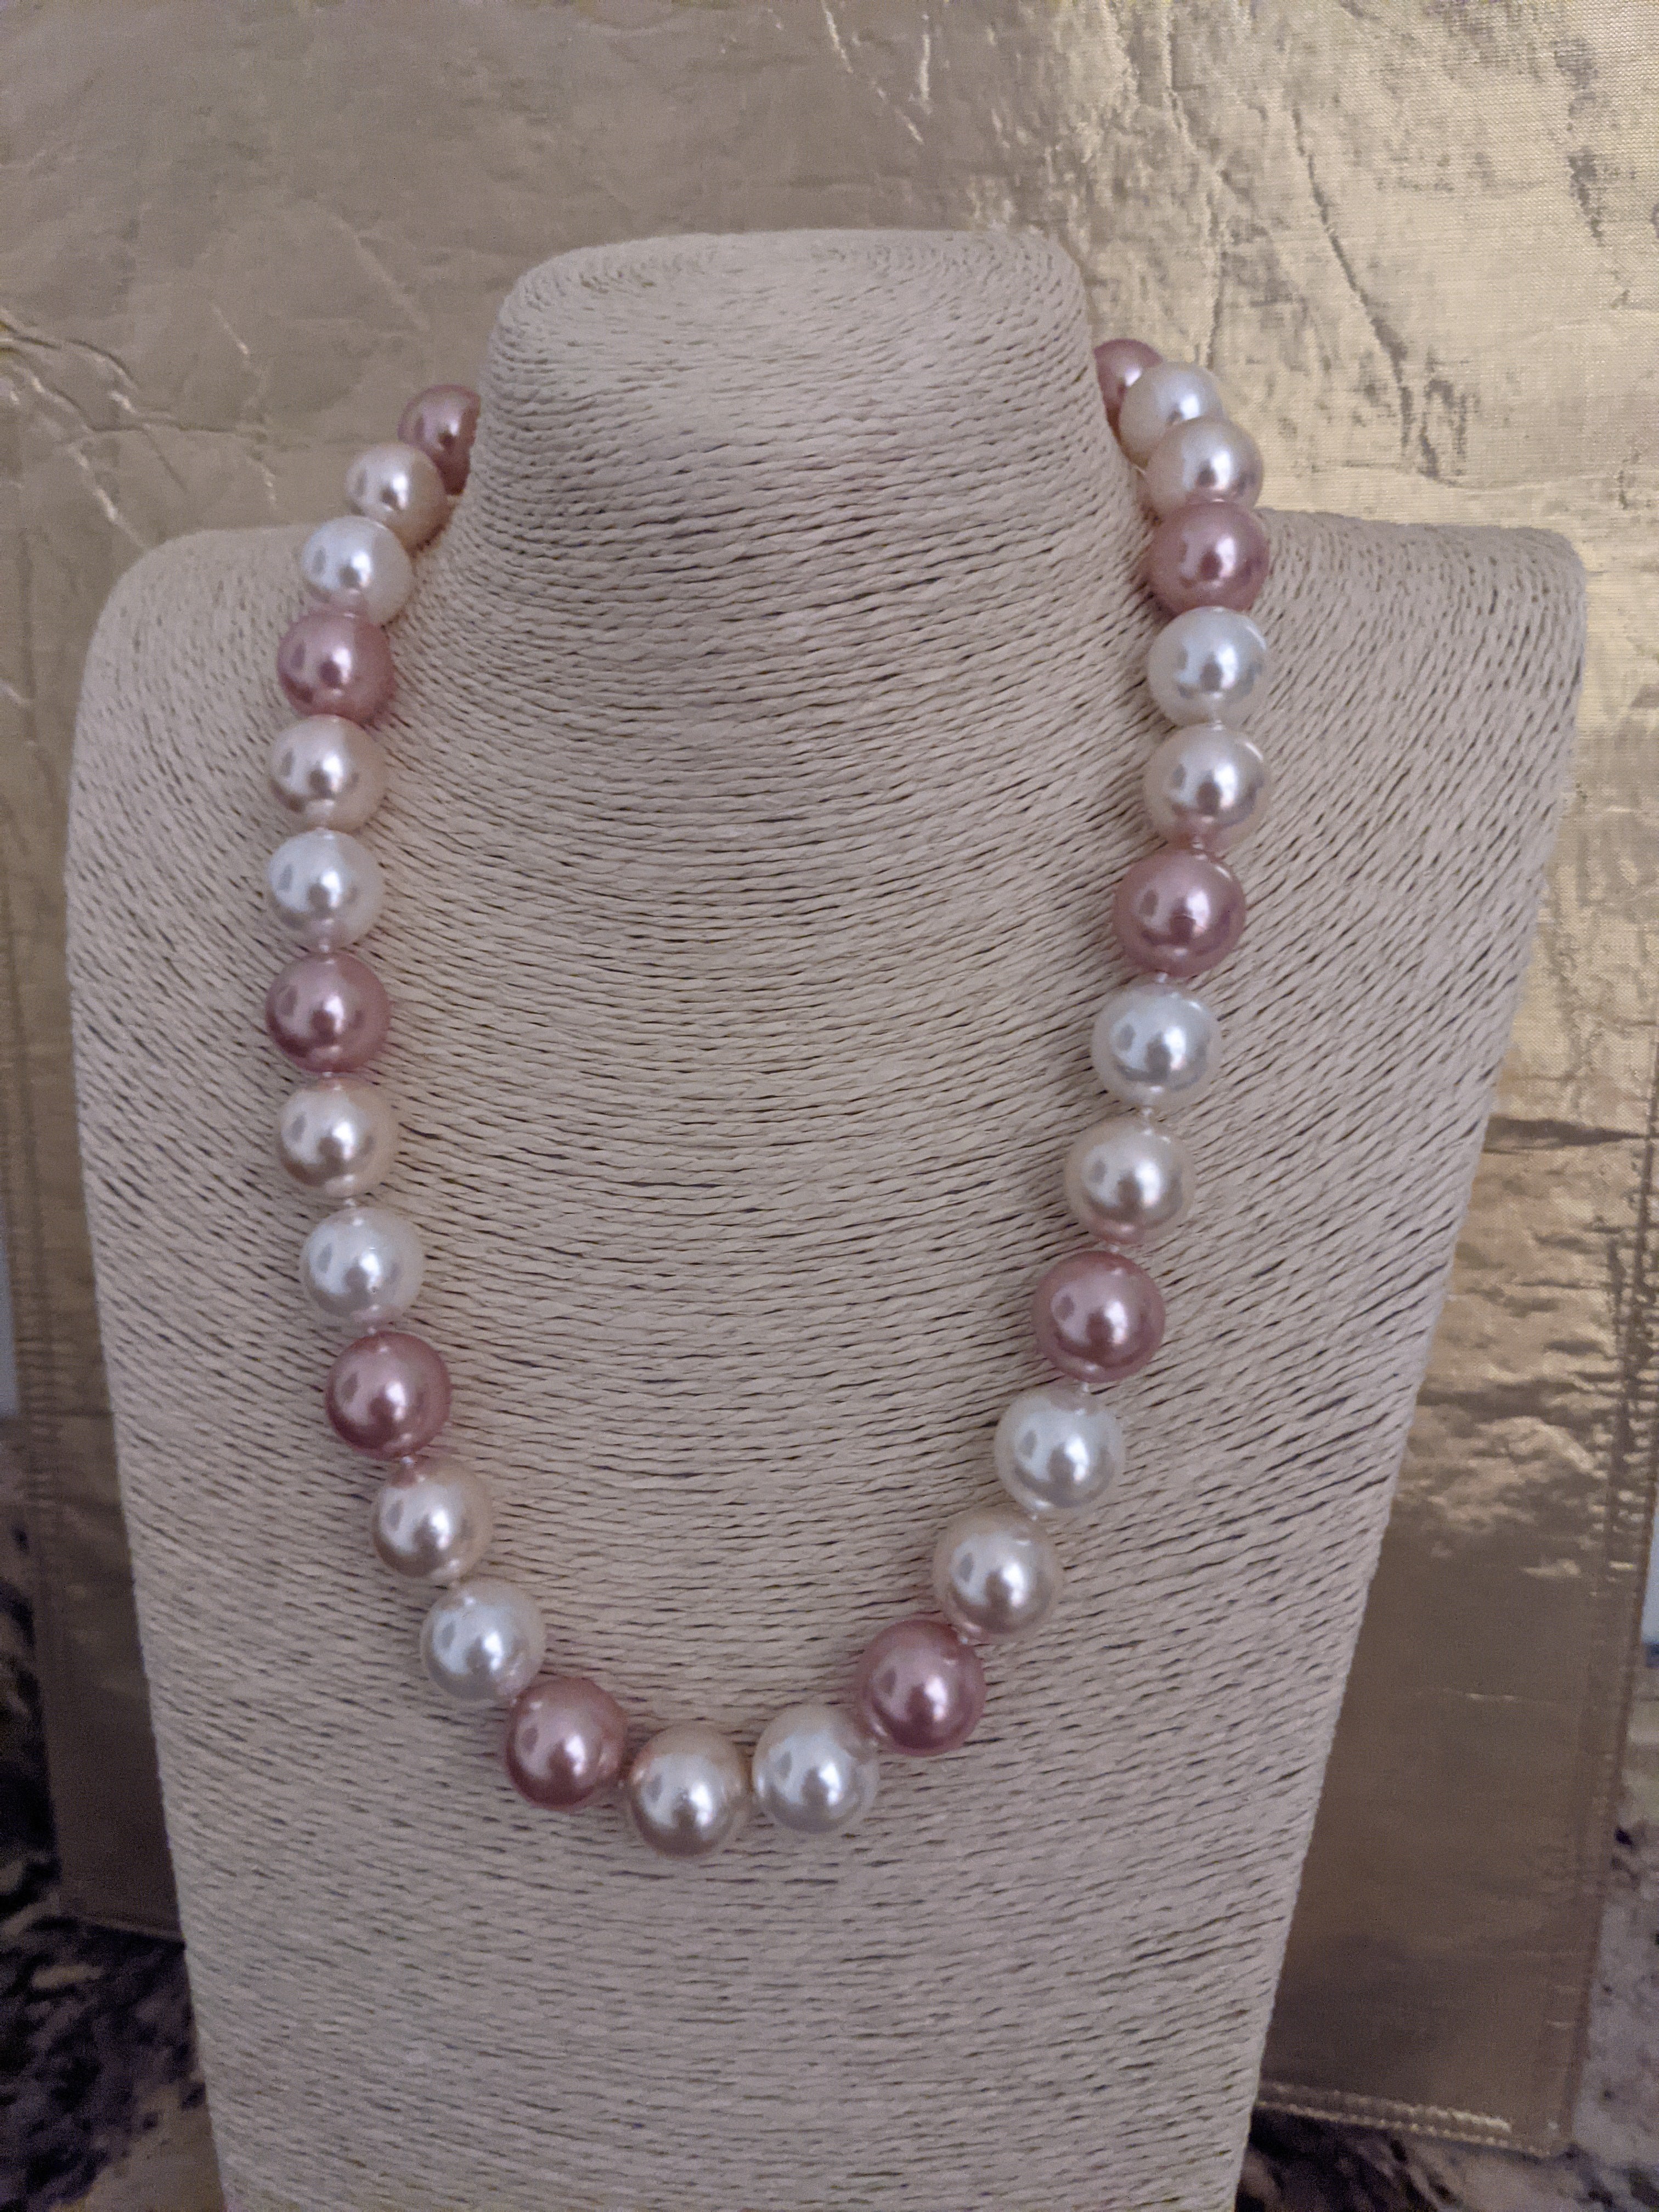 Colour Blossom Necklace, Pink Gold, Pink Mother-Of-Pearl, White  Mother-Of-Pearl And Diamond - Categories Q94355